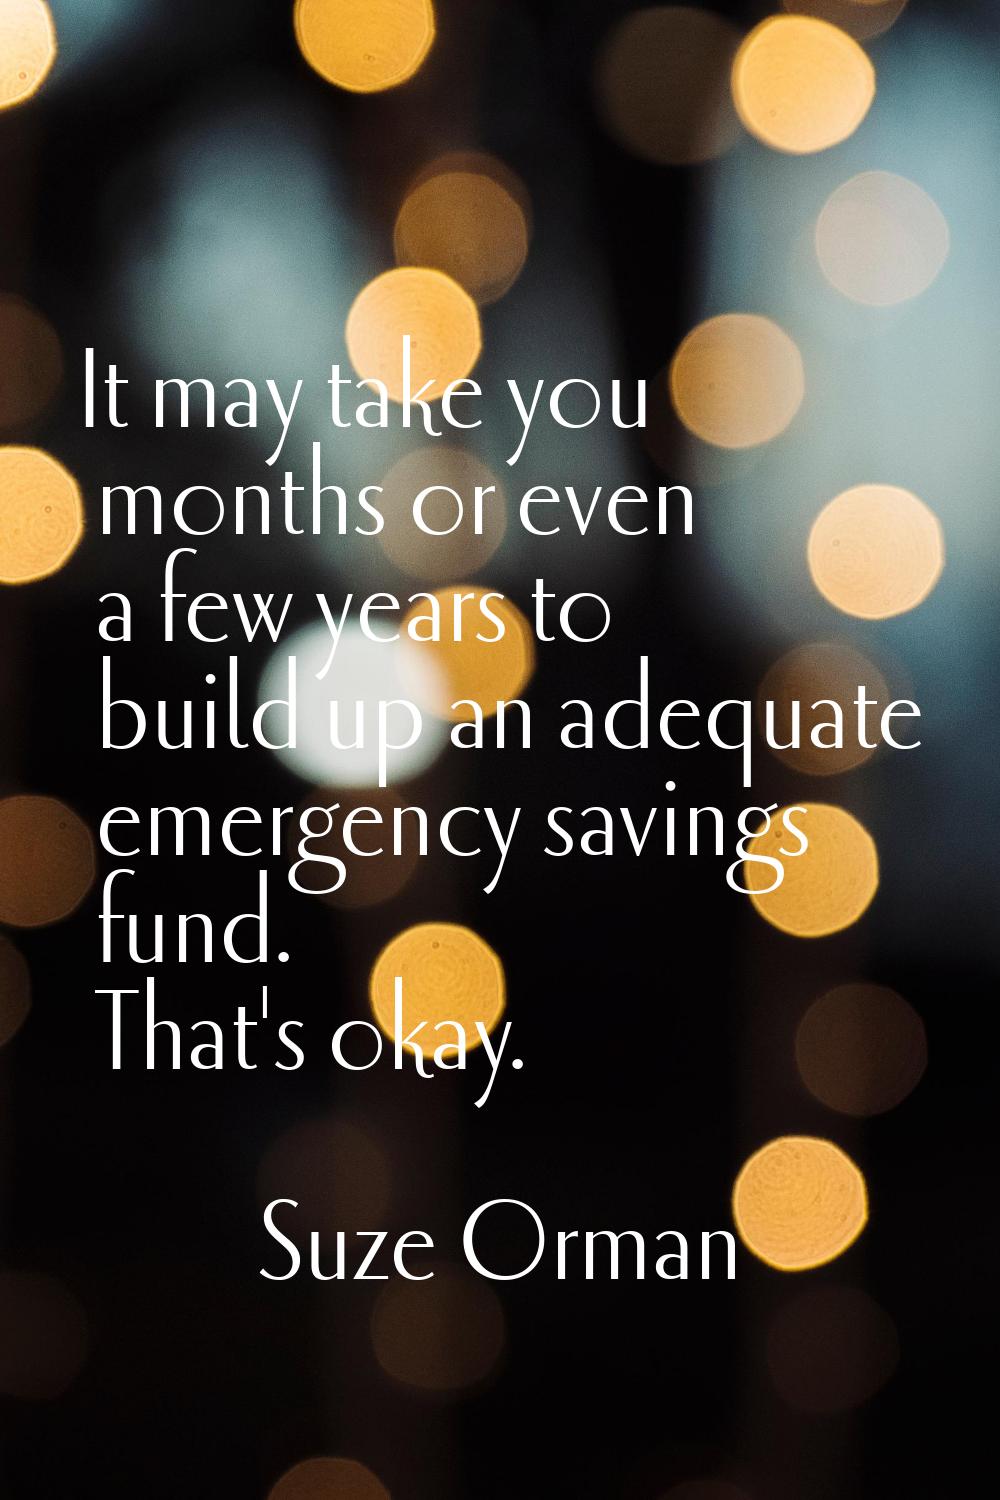 It may take you months or even a few years to build up an adequate emergency savings fund. That's o